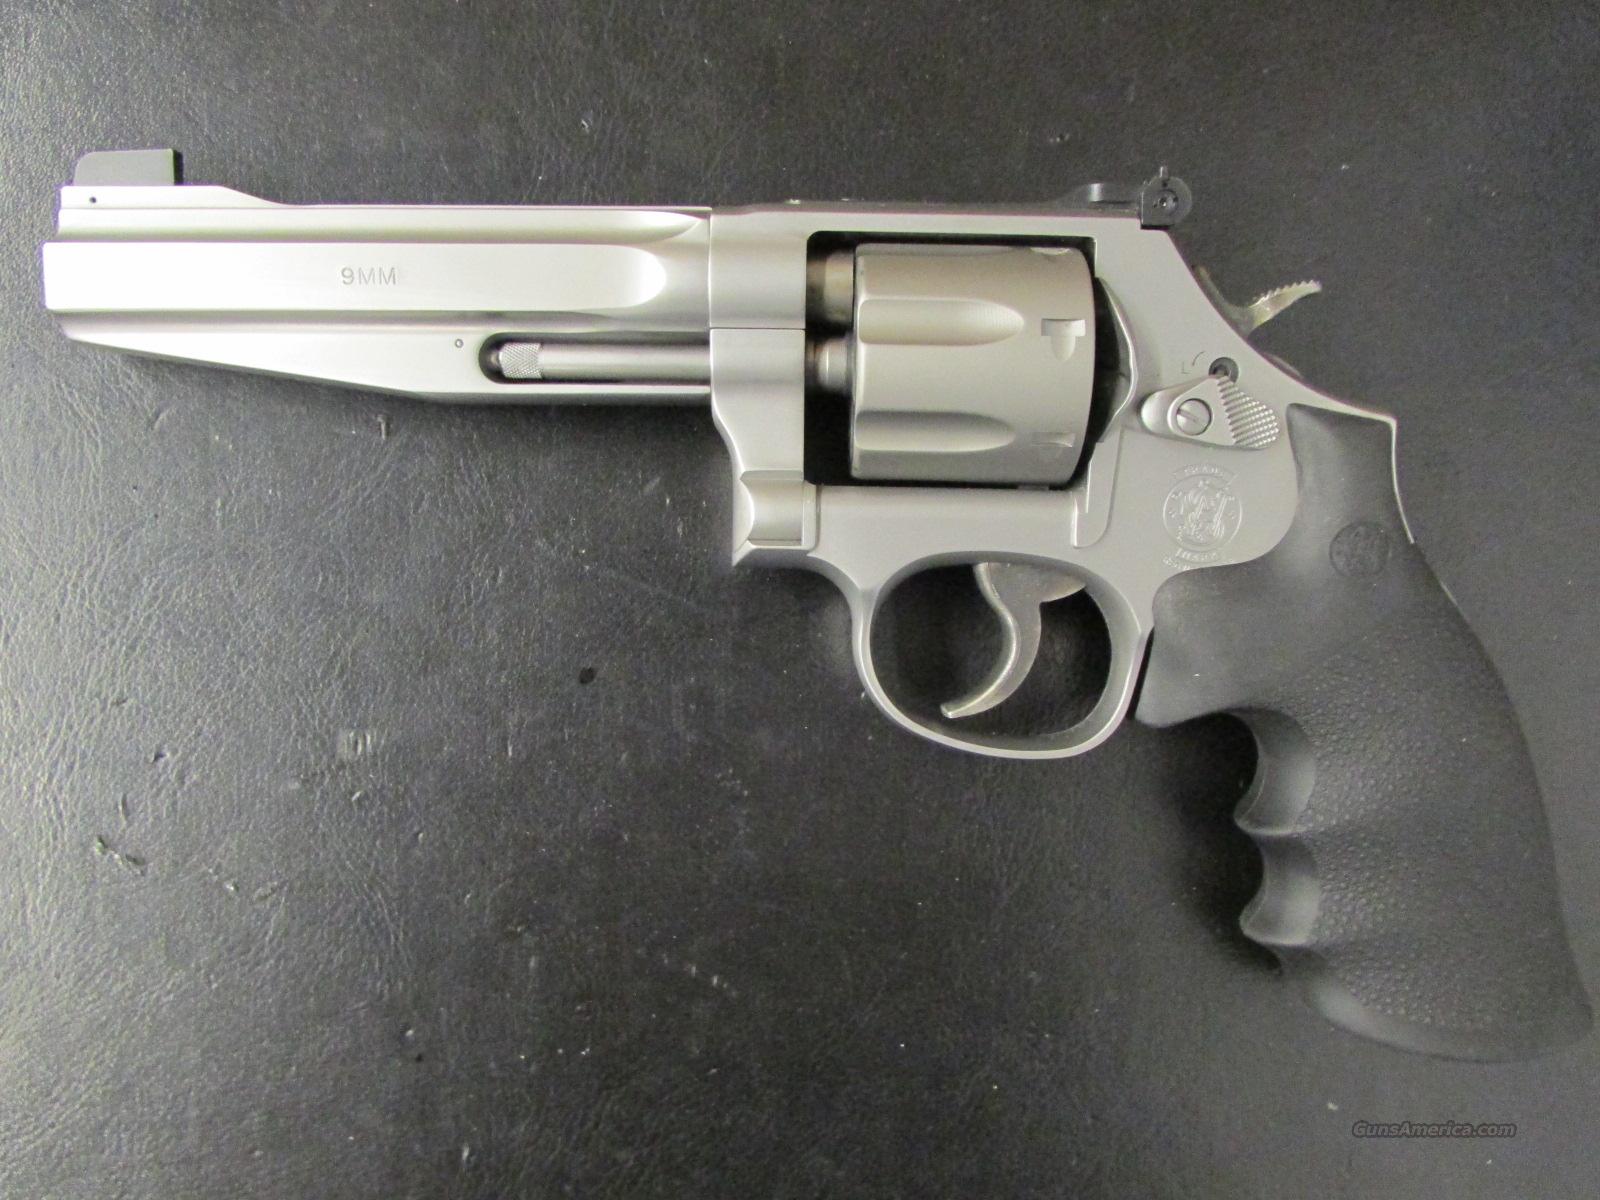 smith and wesson 9mm revolver 986